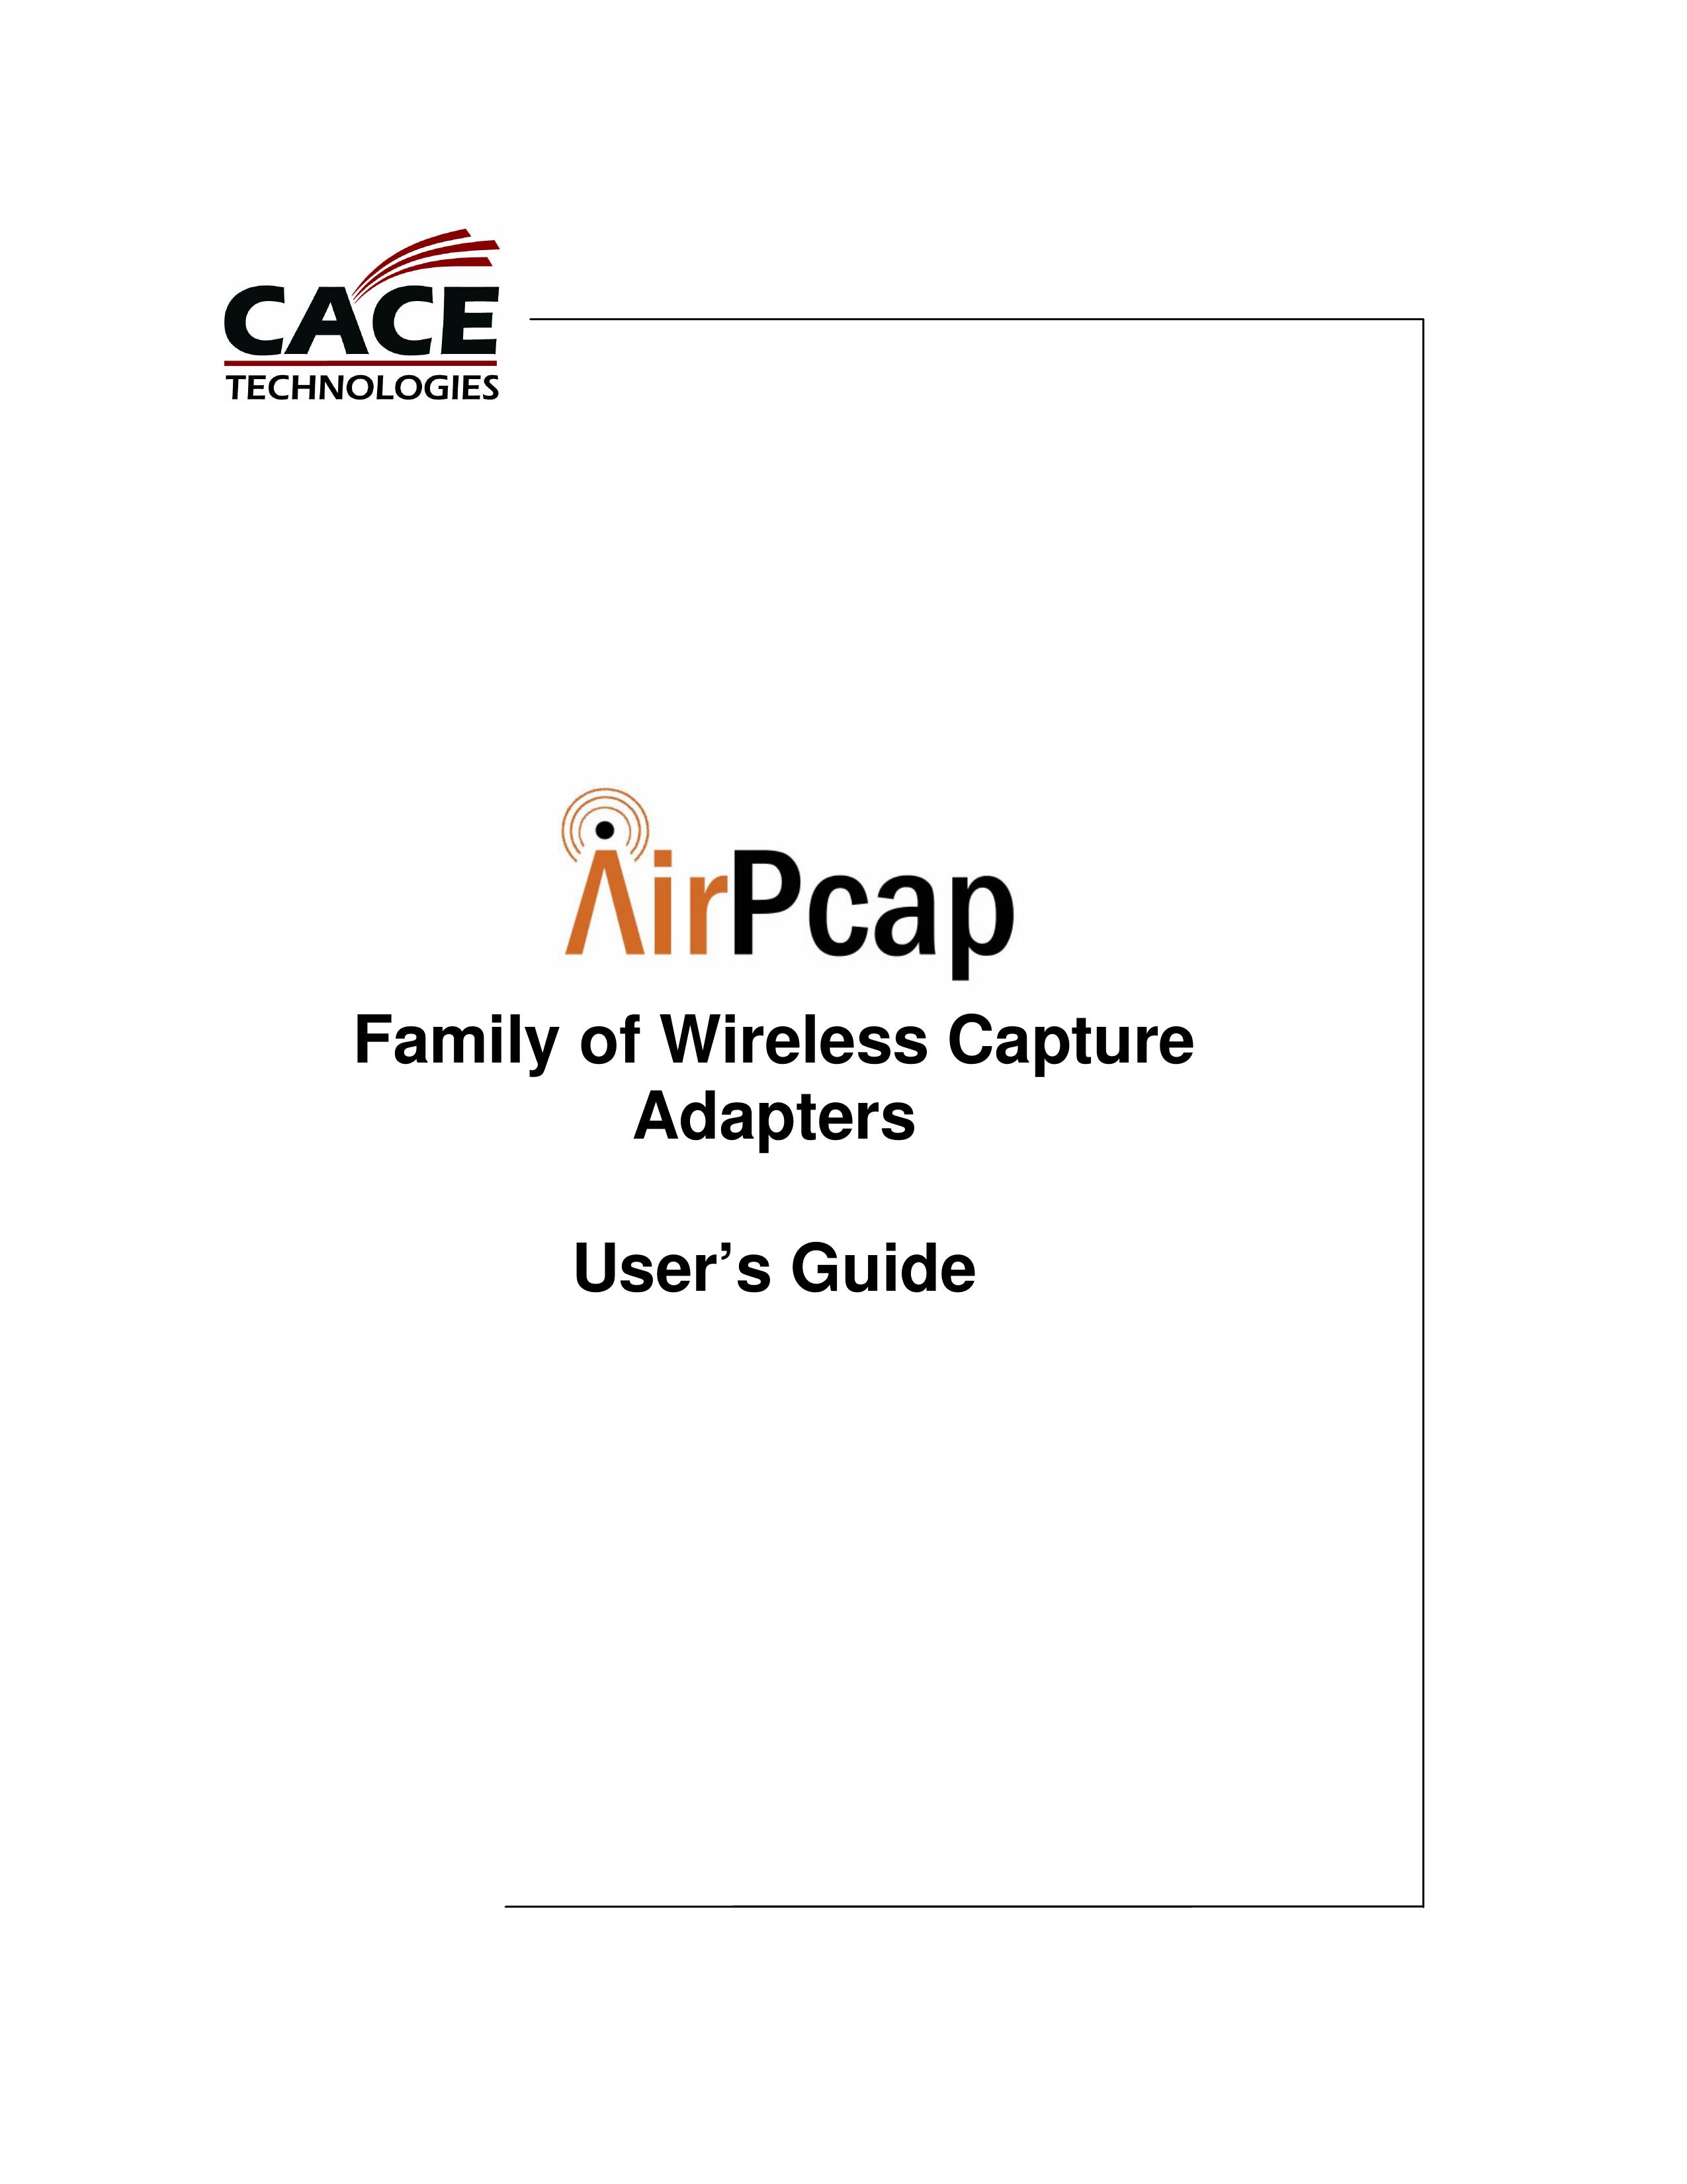 Cace Technologies AirPcap Wireless Capture Adapters Refrigerator User Manual